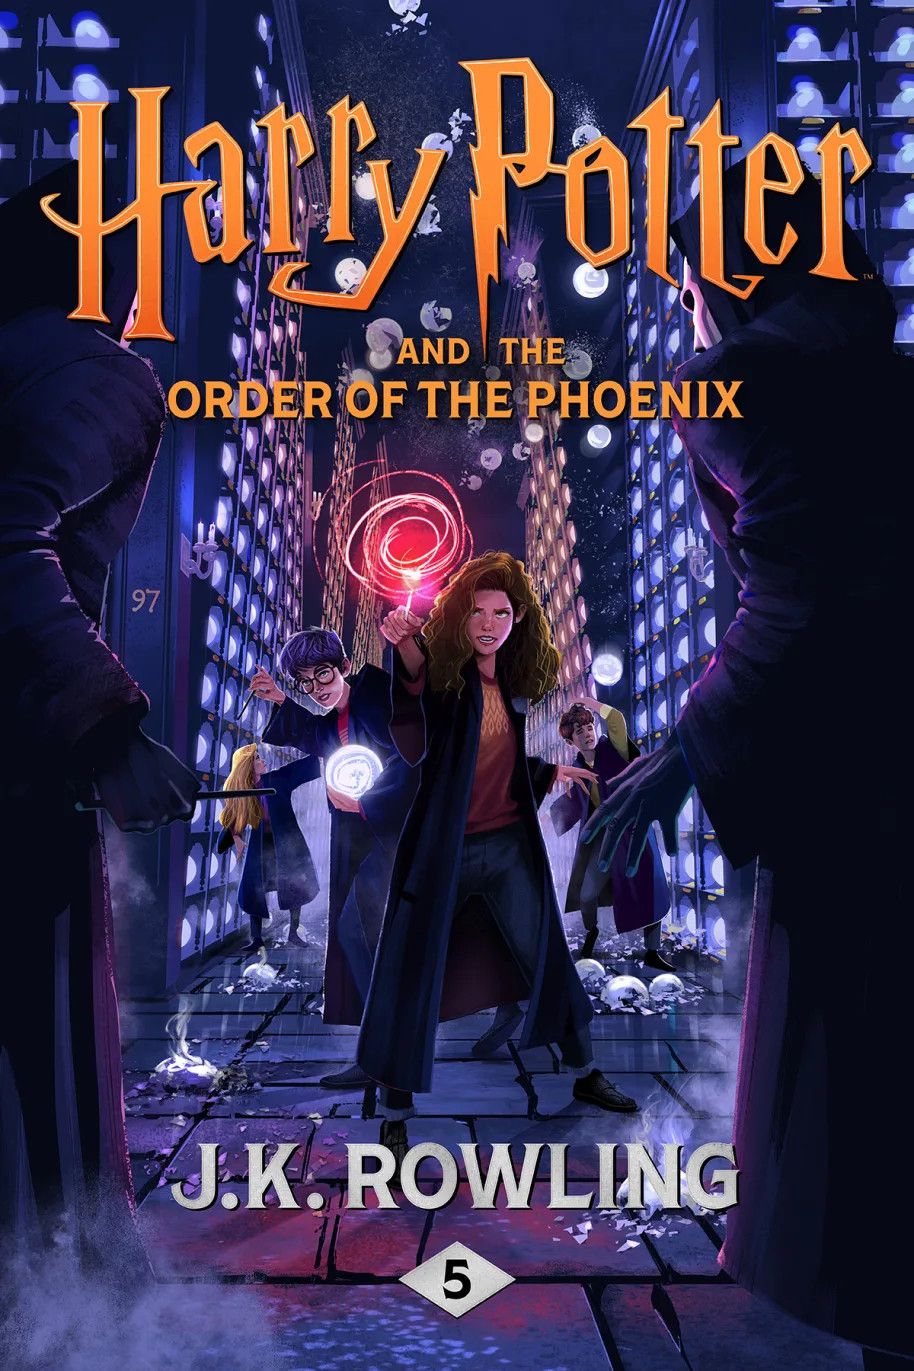 New Harry Potter Book Covers Show Harry, Ron, &amp; Hermione’s Updated Looks